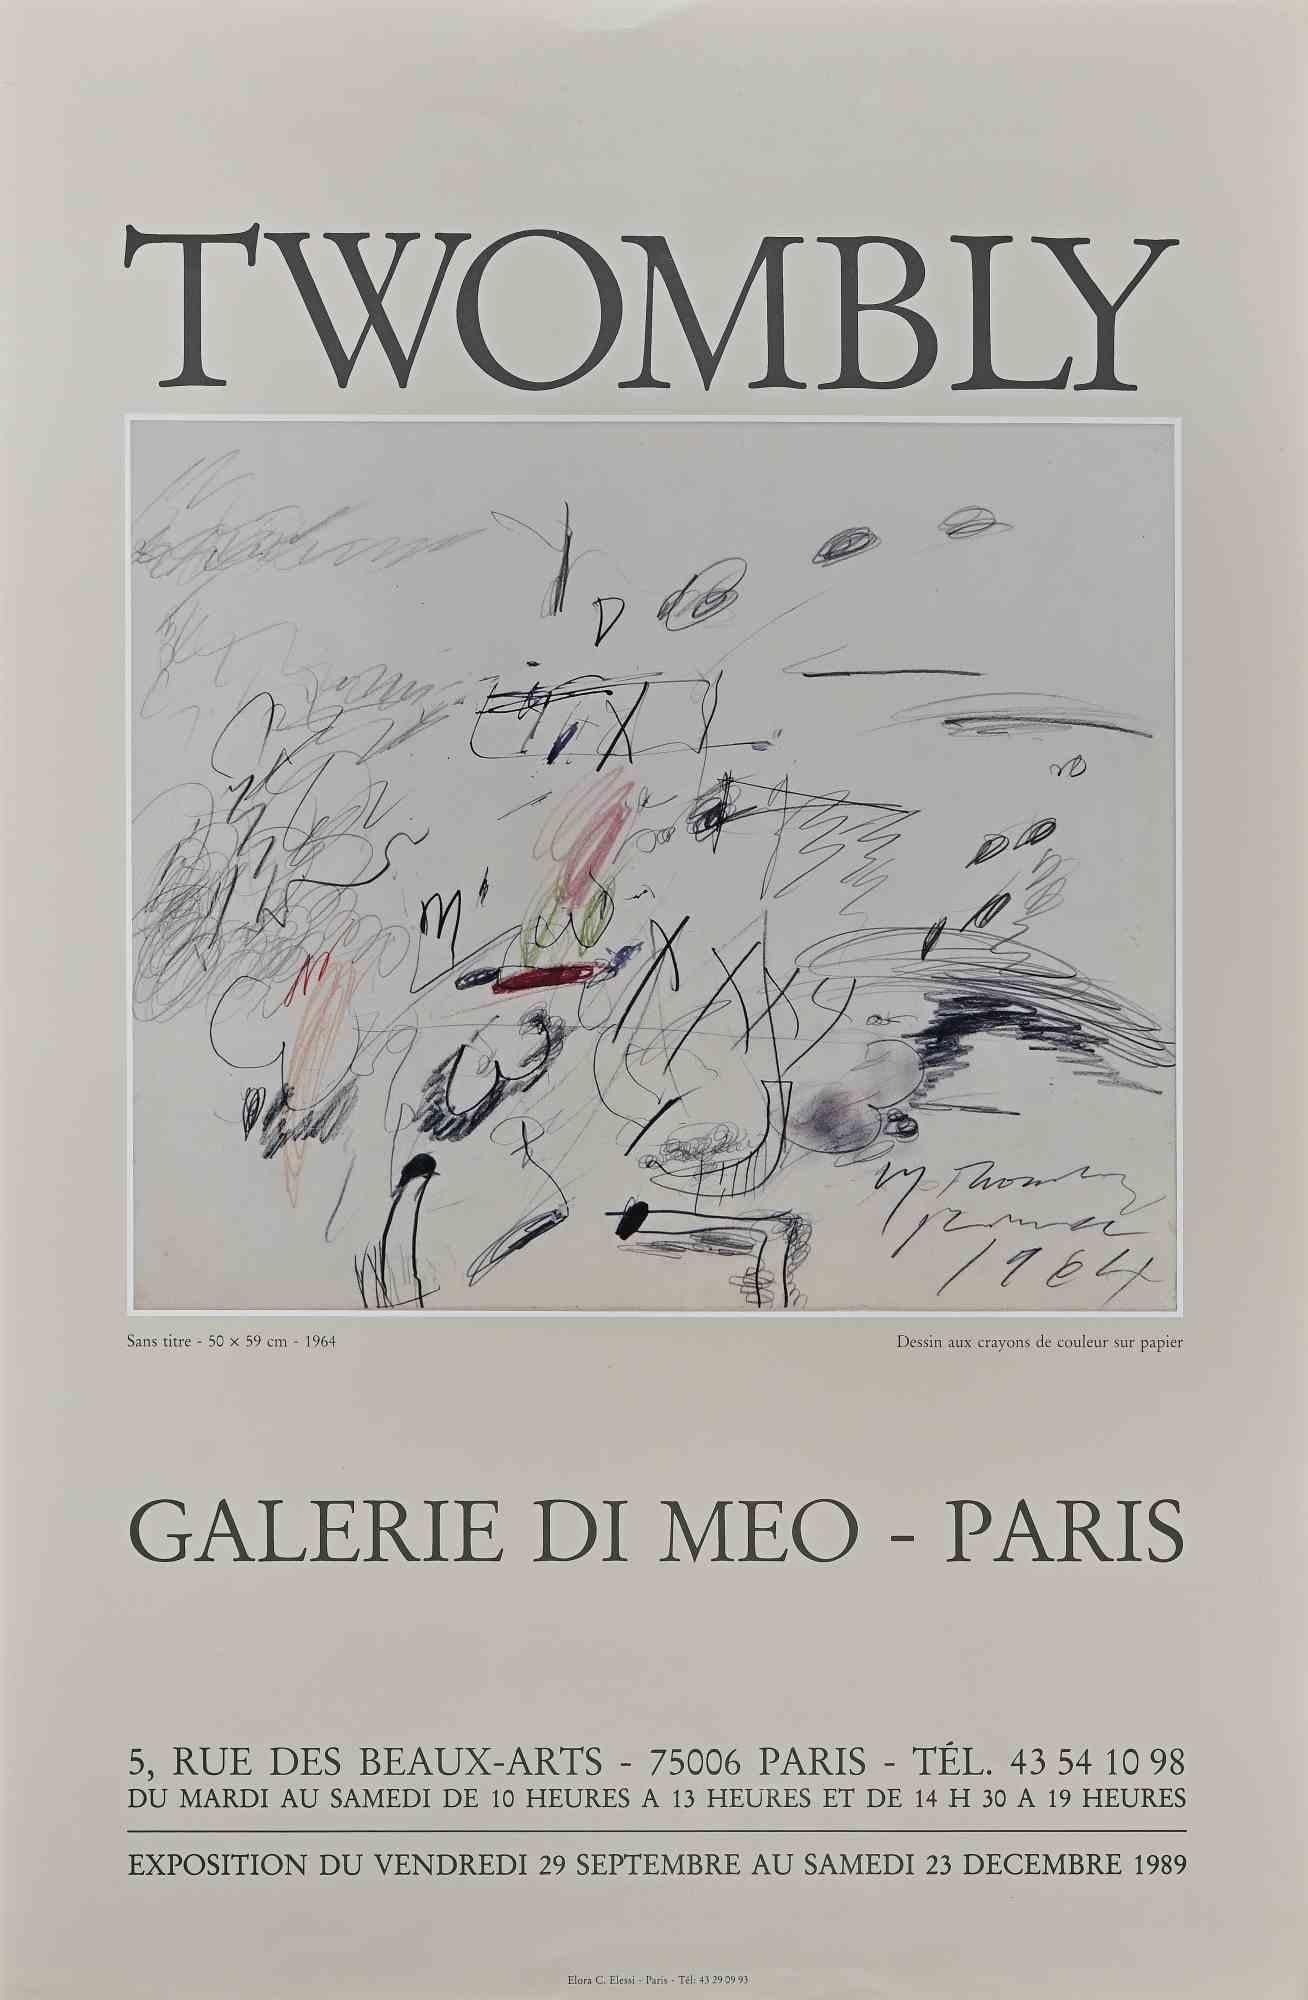 Abstract Print Cy Twombly - Exposition doublement exposée, Galerie Di Meo - 2003